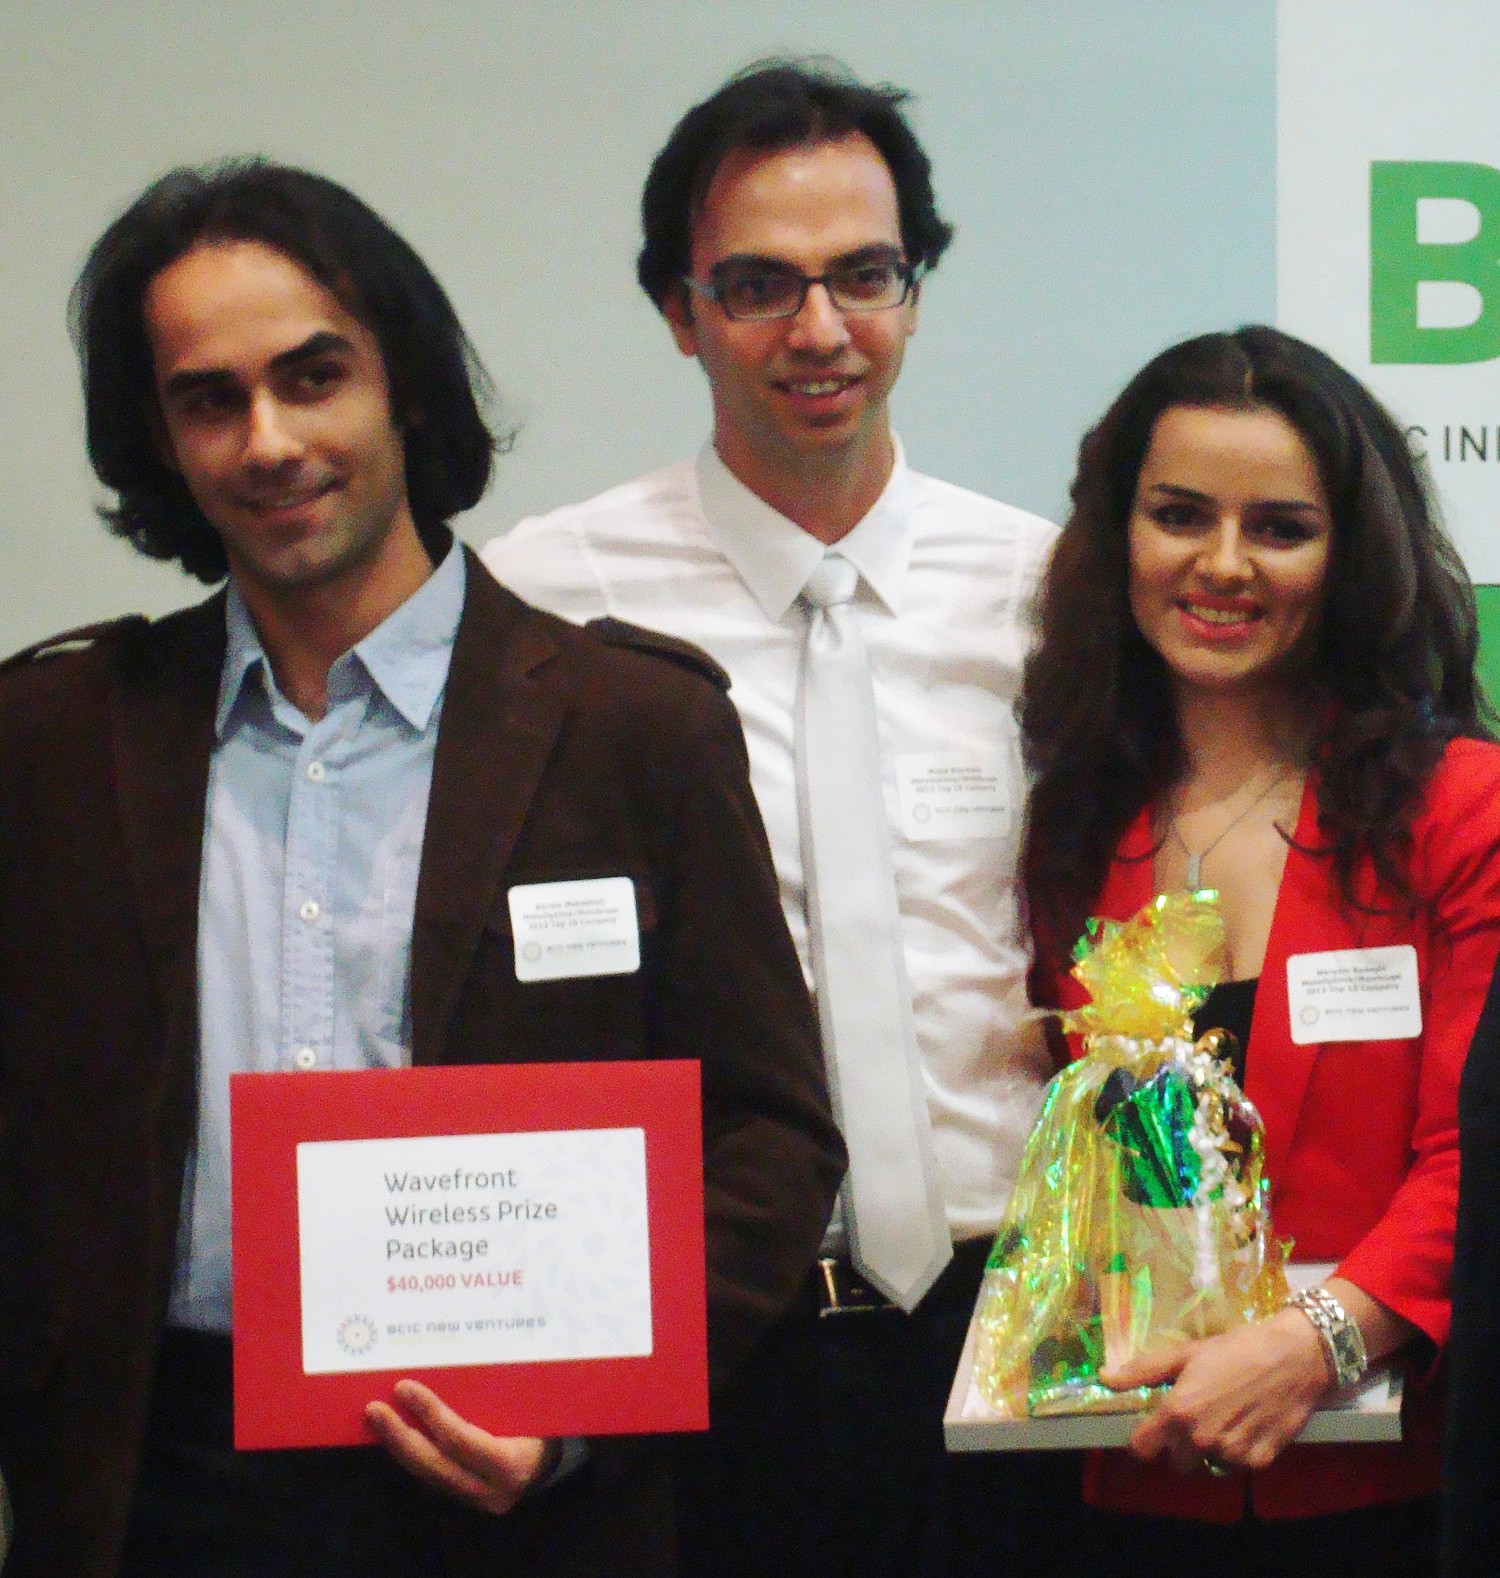 MetaOptima team collects WaveFront Wireless Prize at 2013 New Ventures Competition